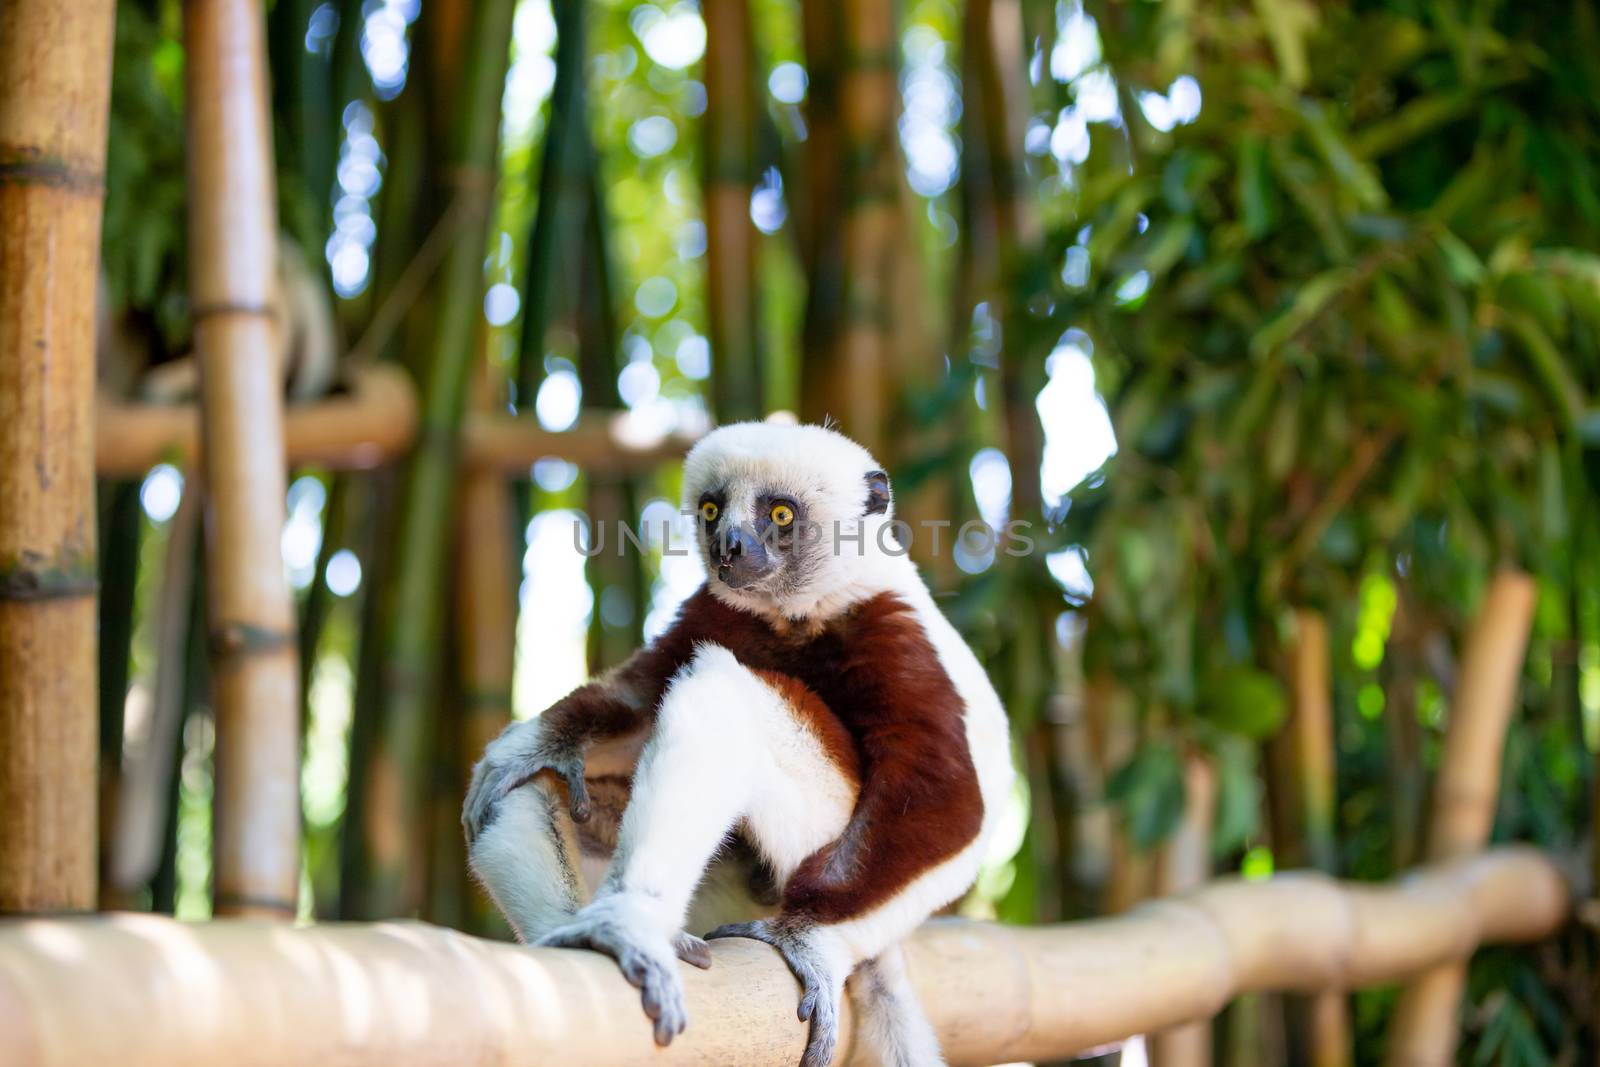 The Coquerel Sifaka in its natural environment in a national park on the island of Madagascar by 25ehaag6